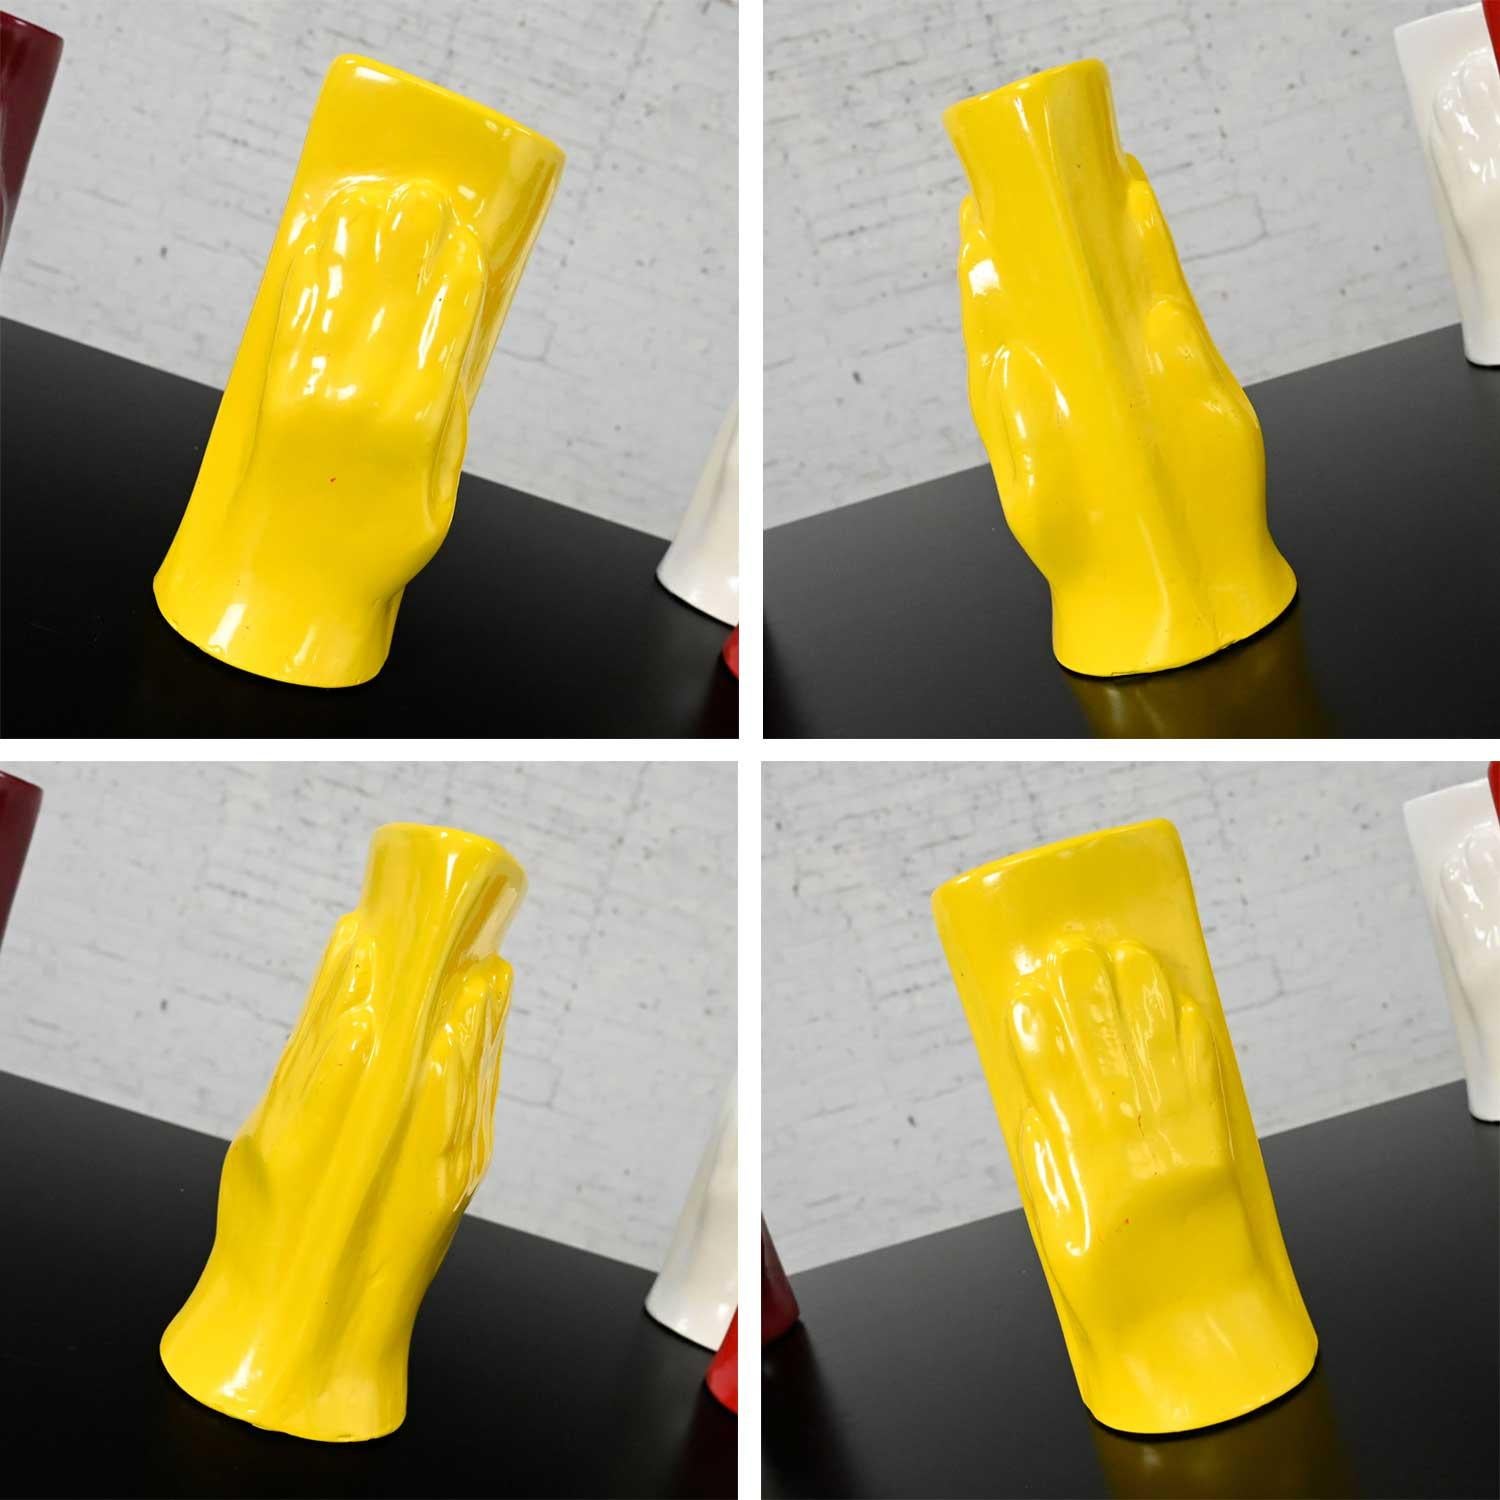 Folk Art Multi Color Molded Plastic or Acrylic Hand Vases Set of 7 For Sale 2